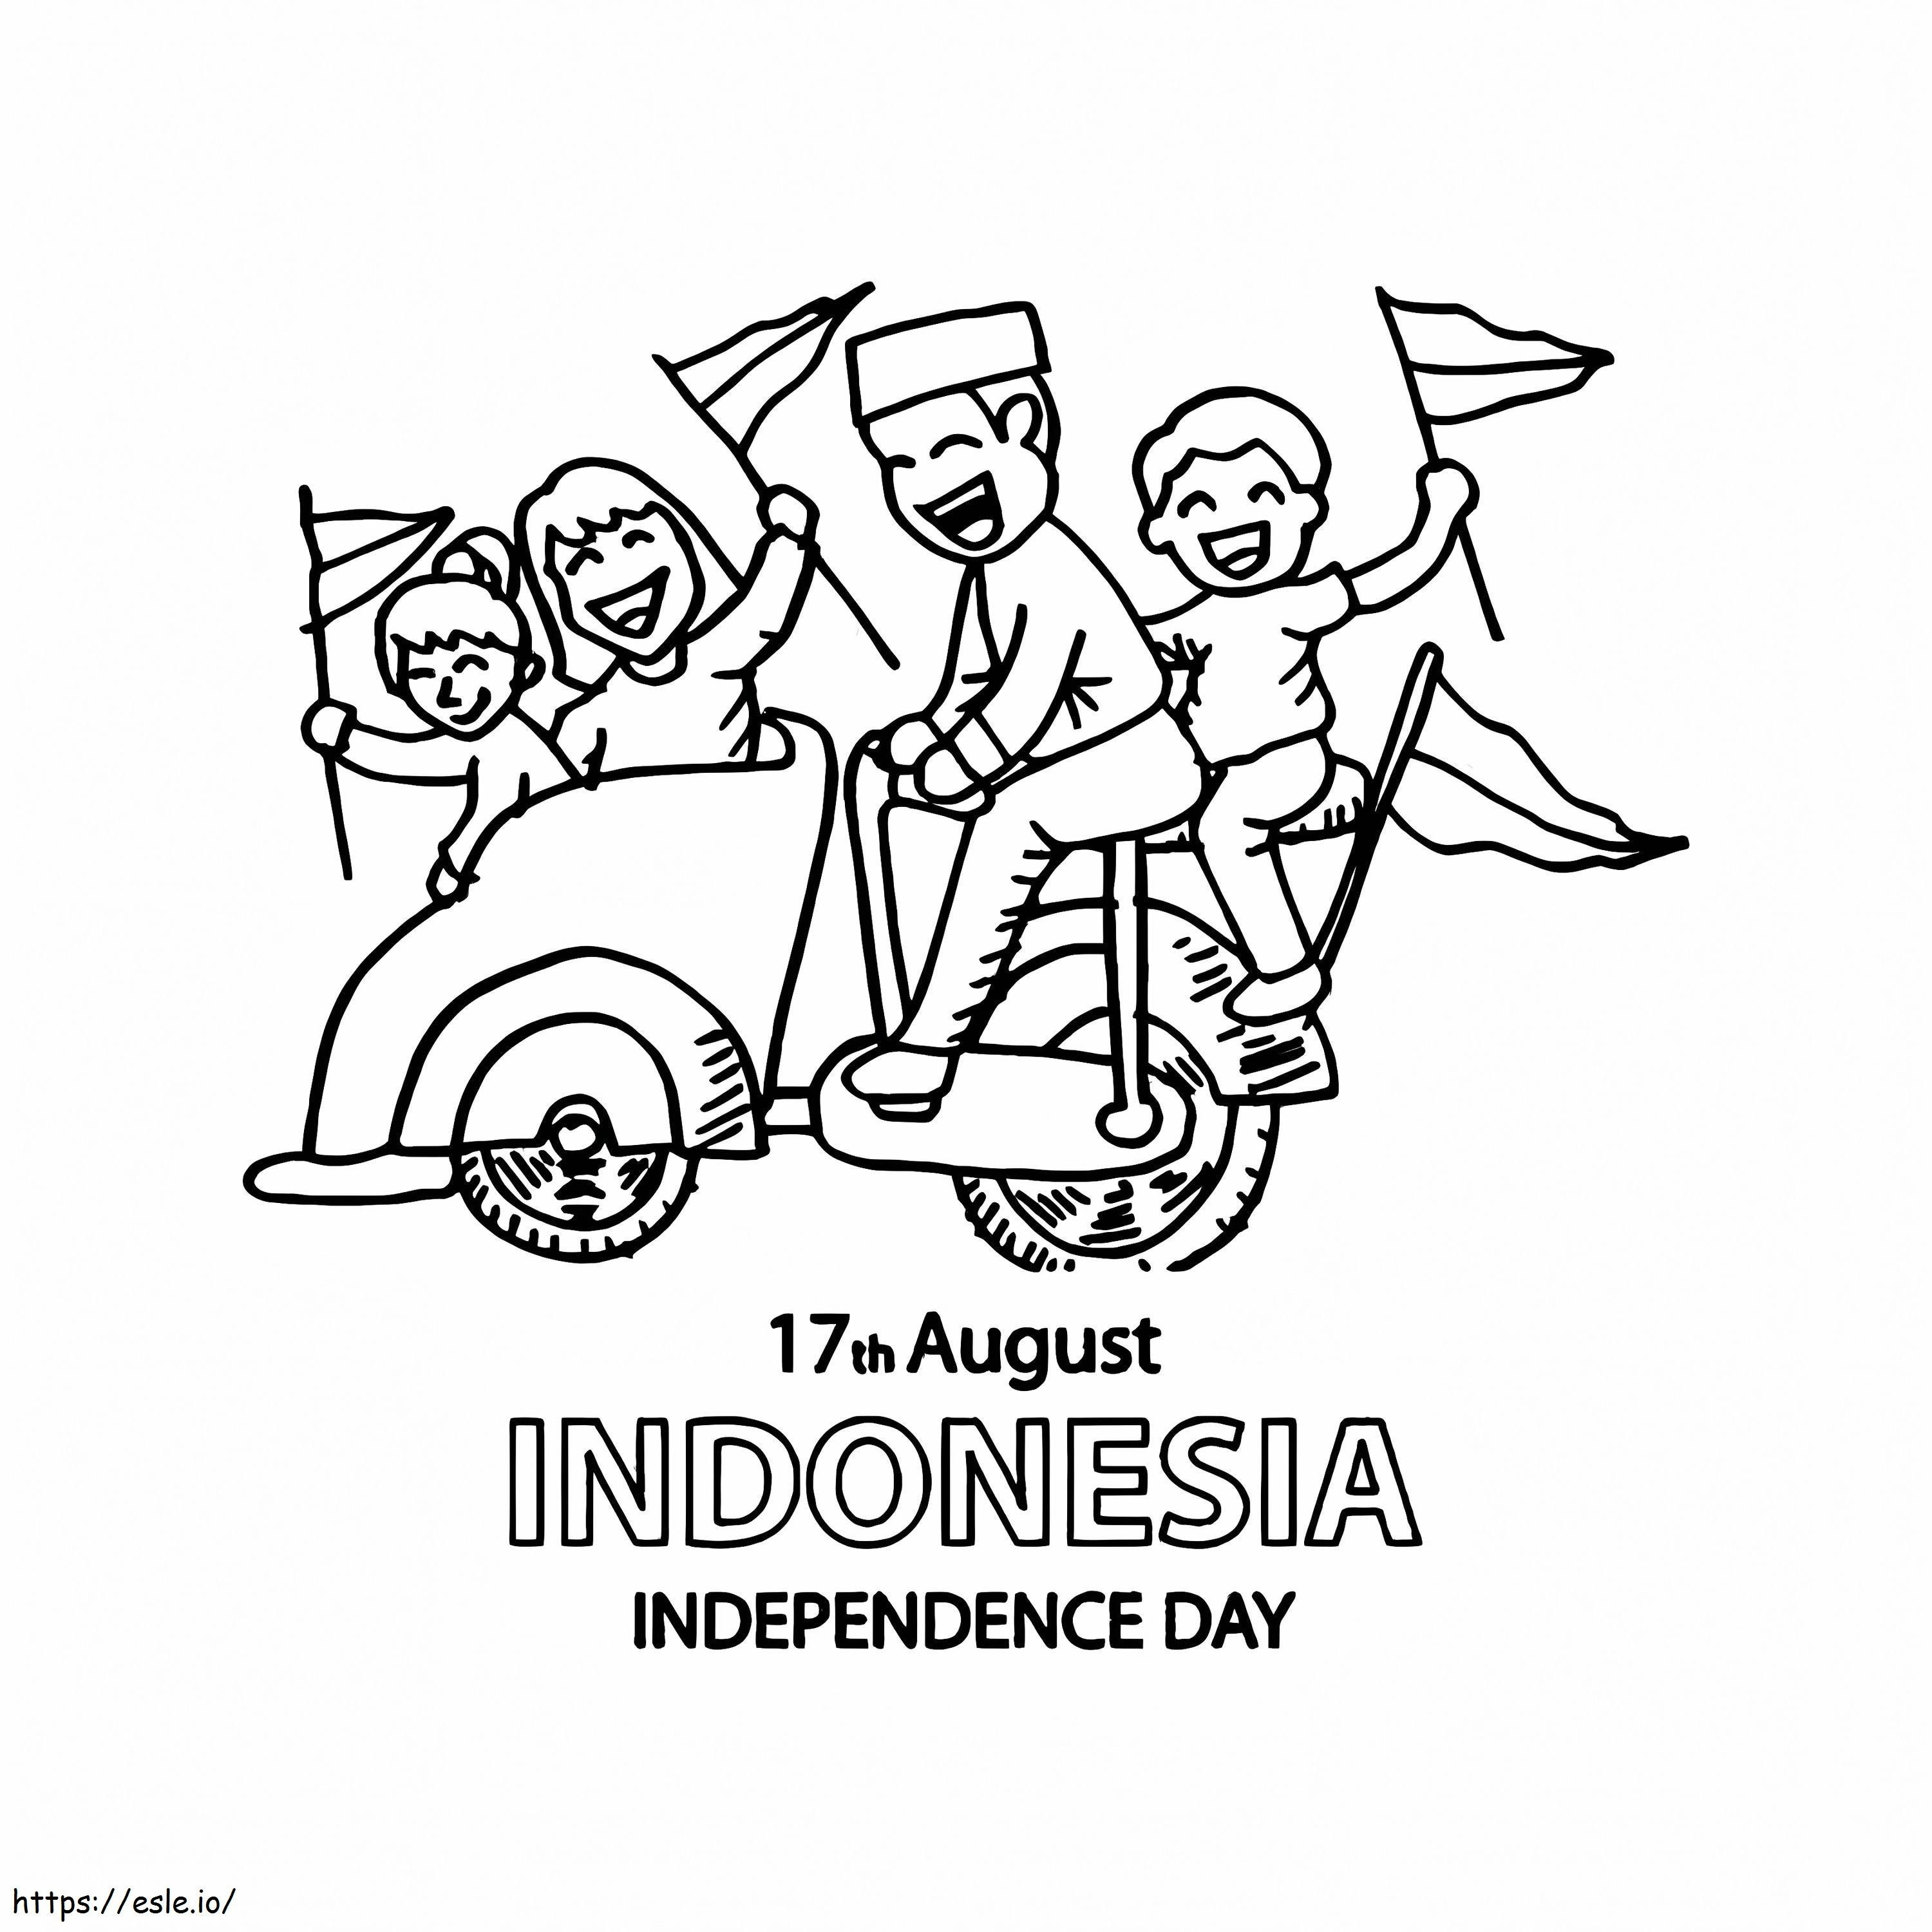 Indonesia Independence Day coloring page